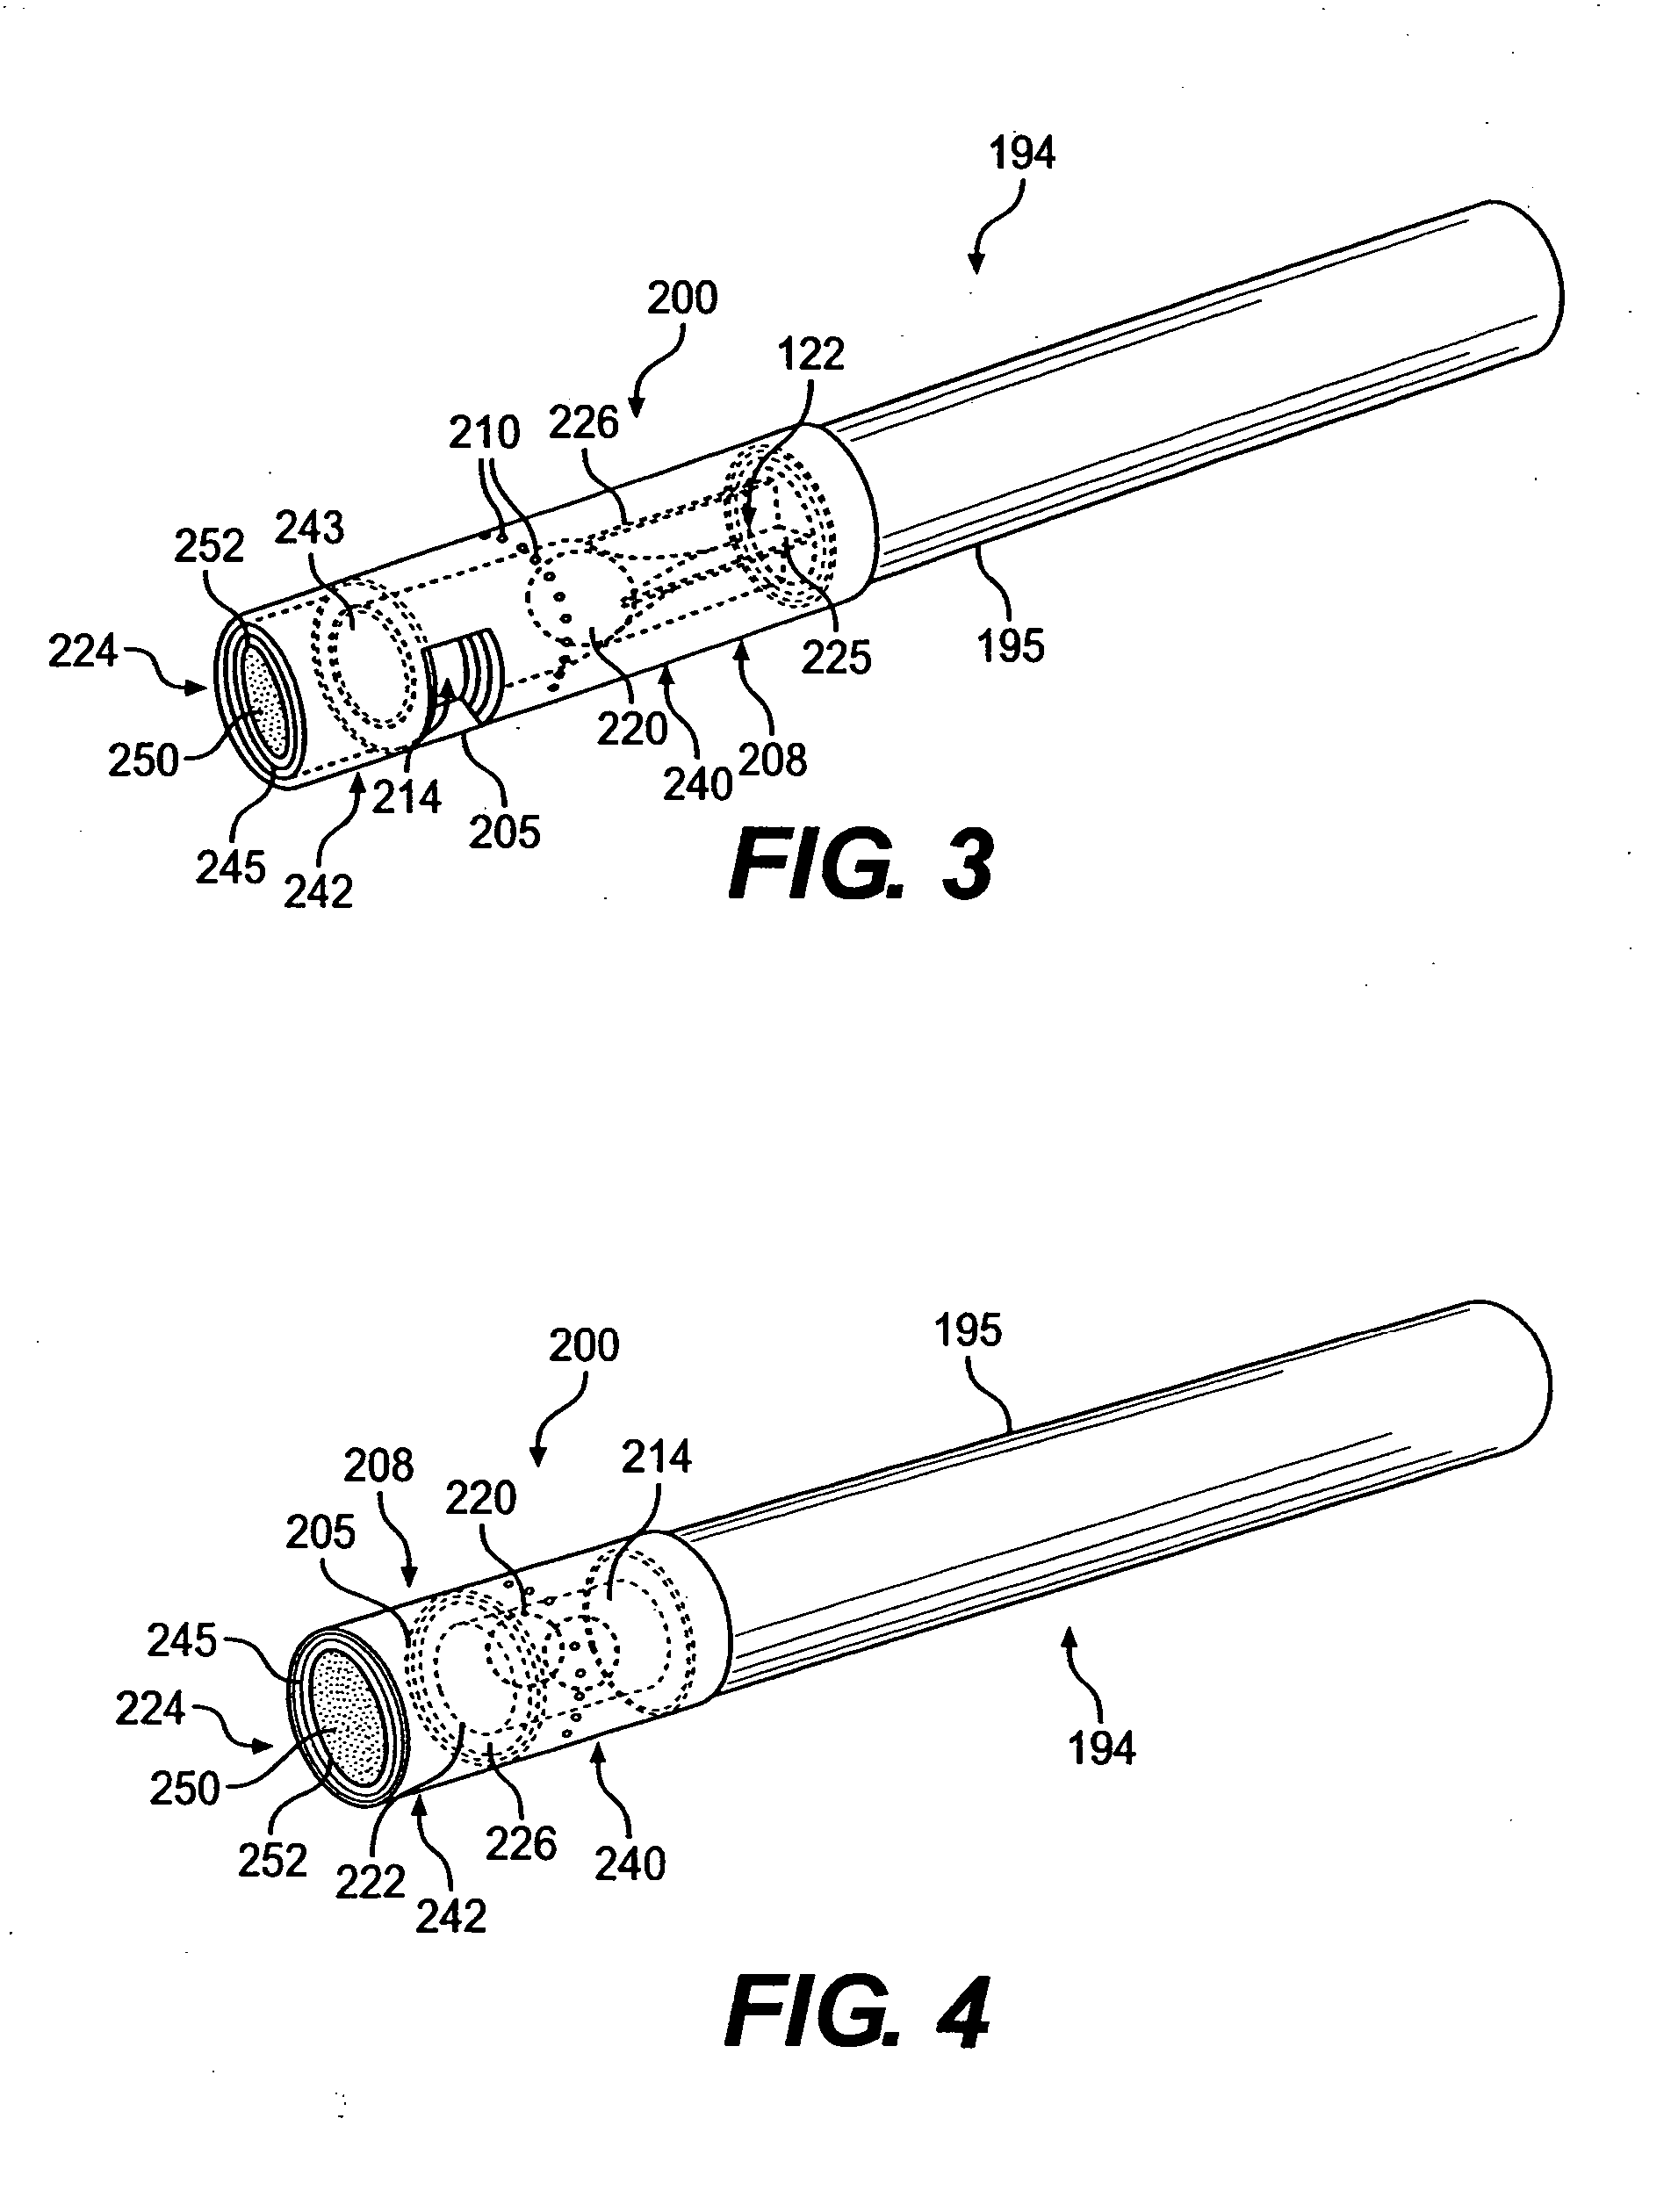 Filtered cigarette incorporating a breakable capsule